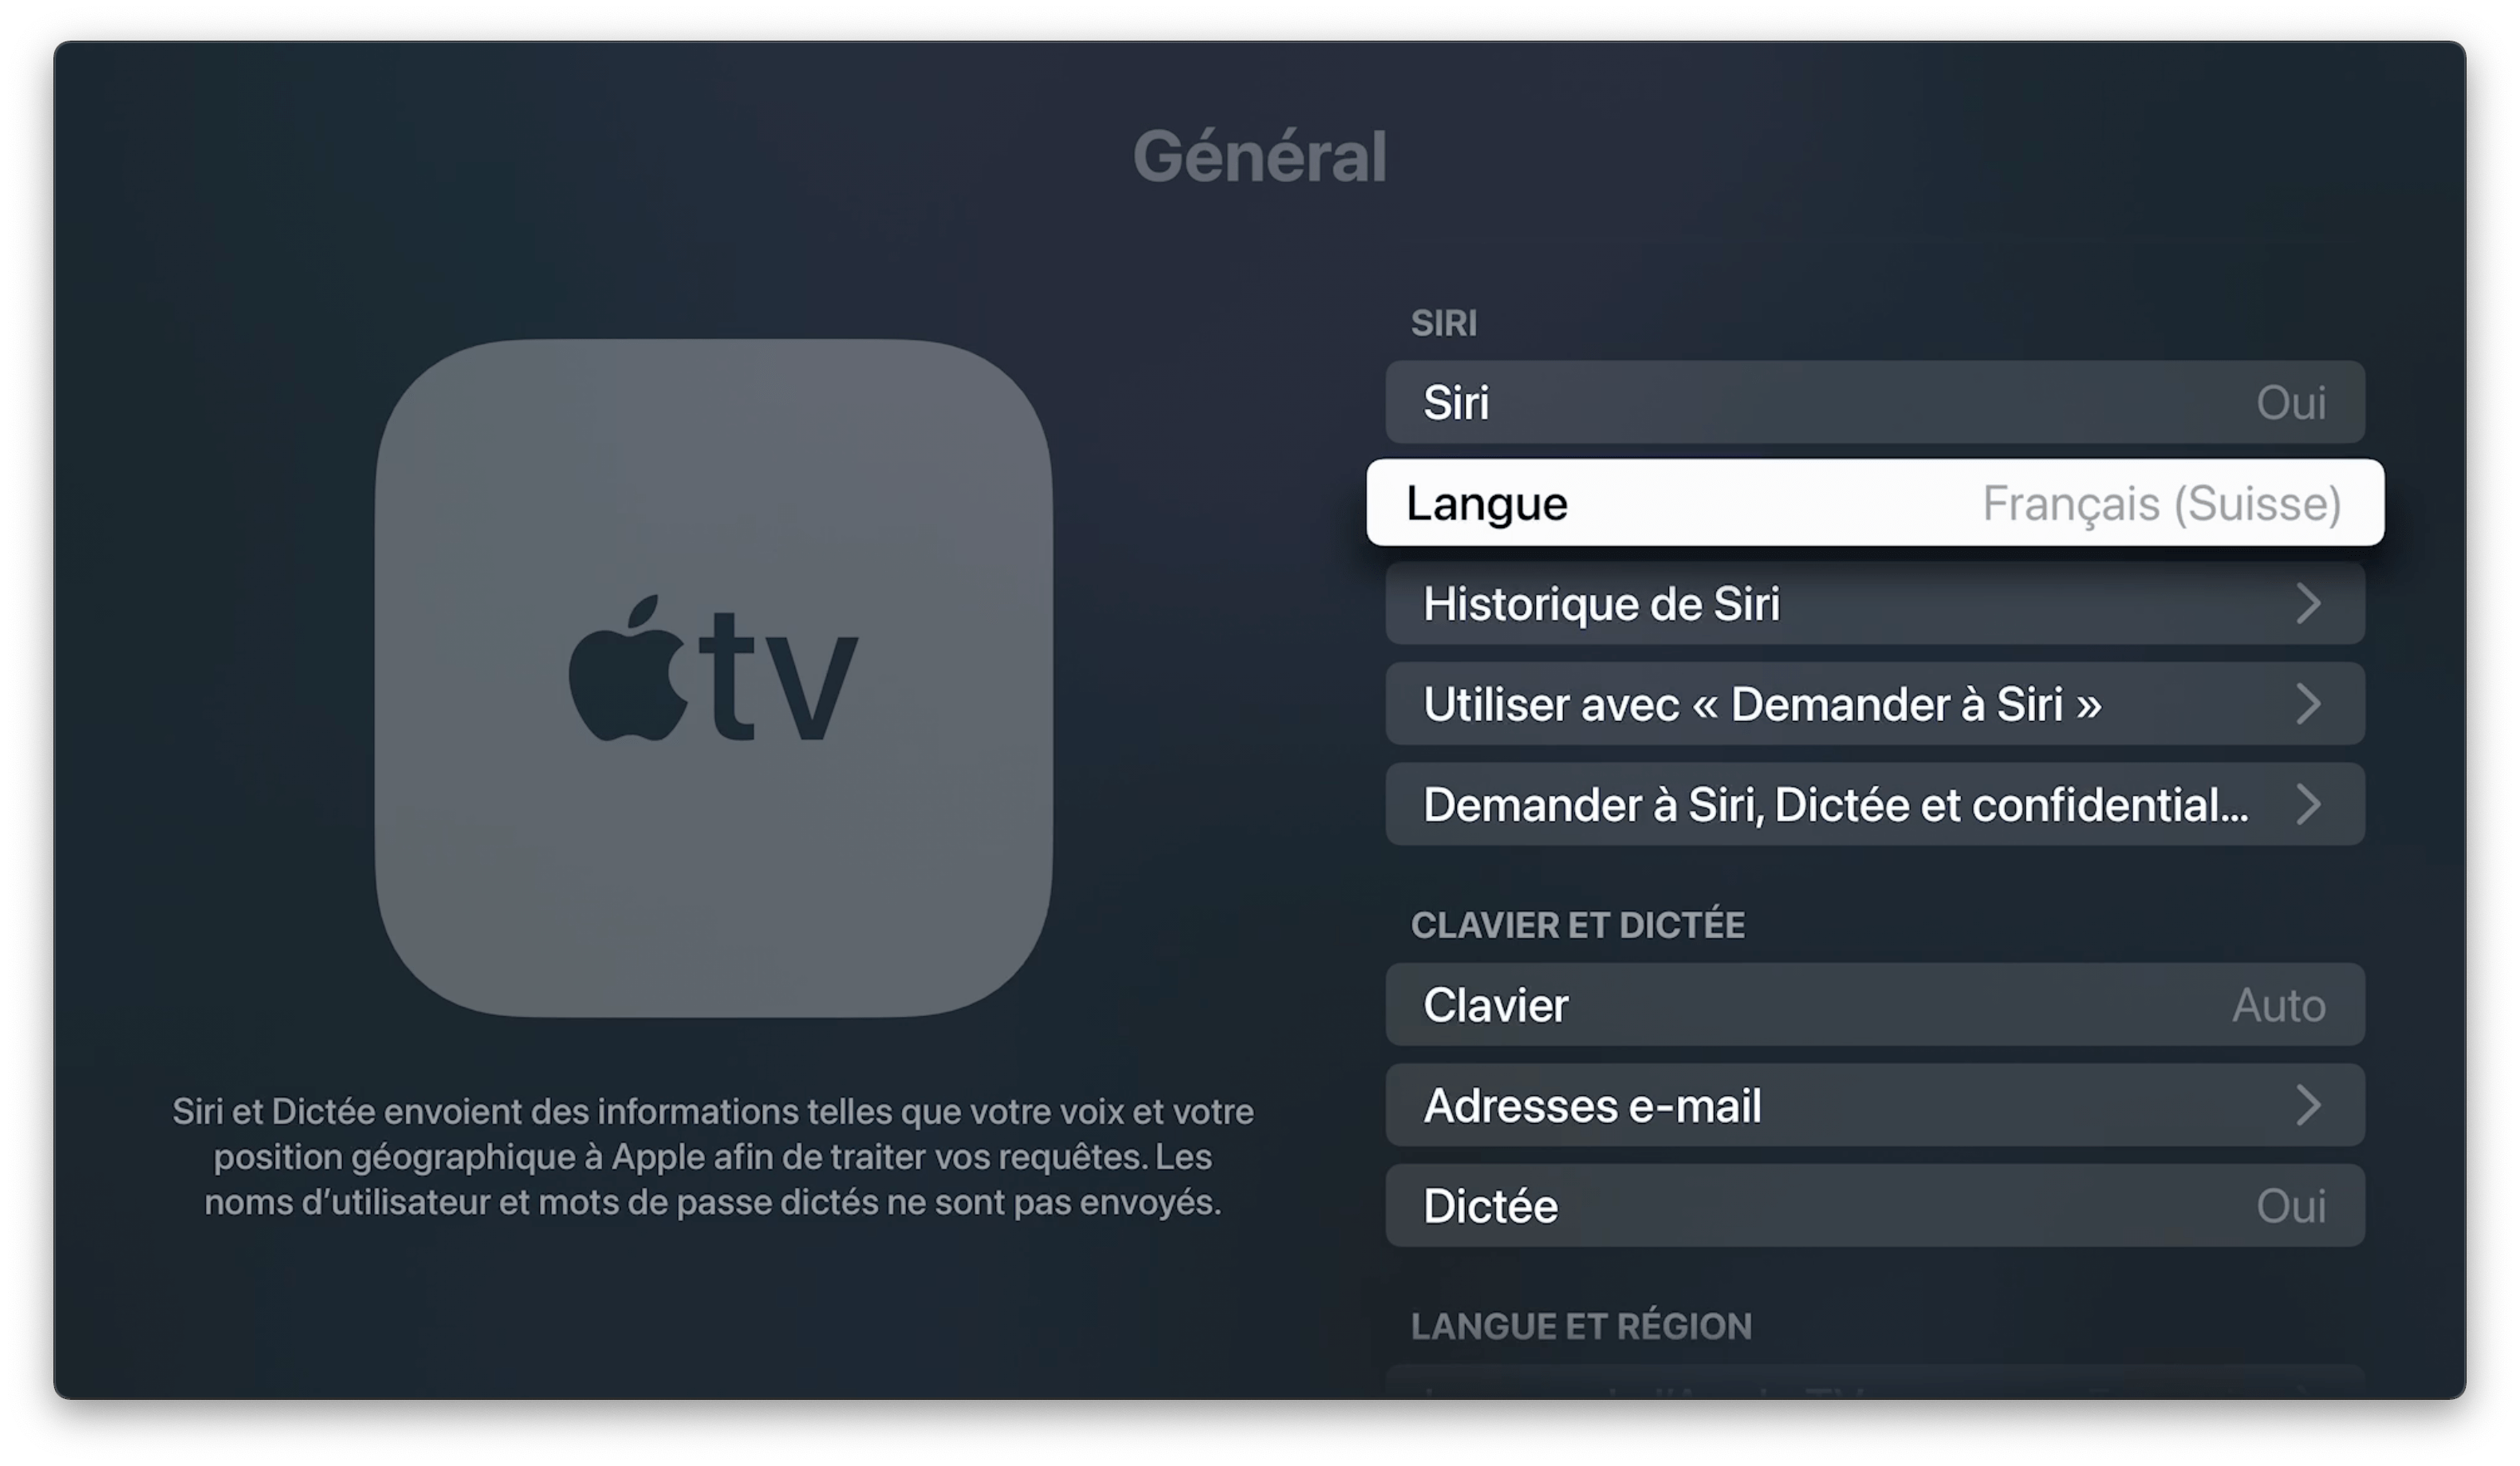 Screenshot of the Apple TV settings showing Siri activated for Switzerland